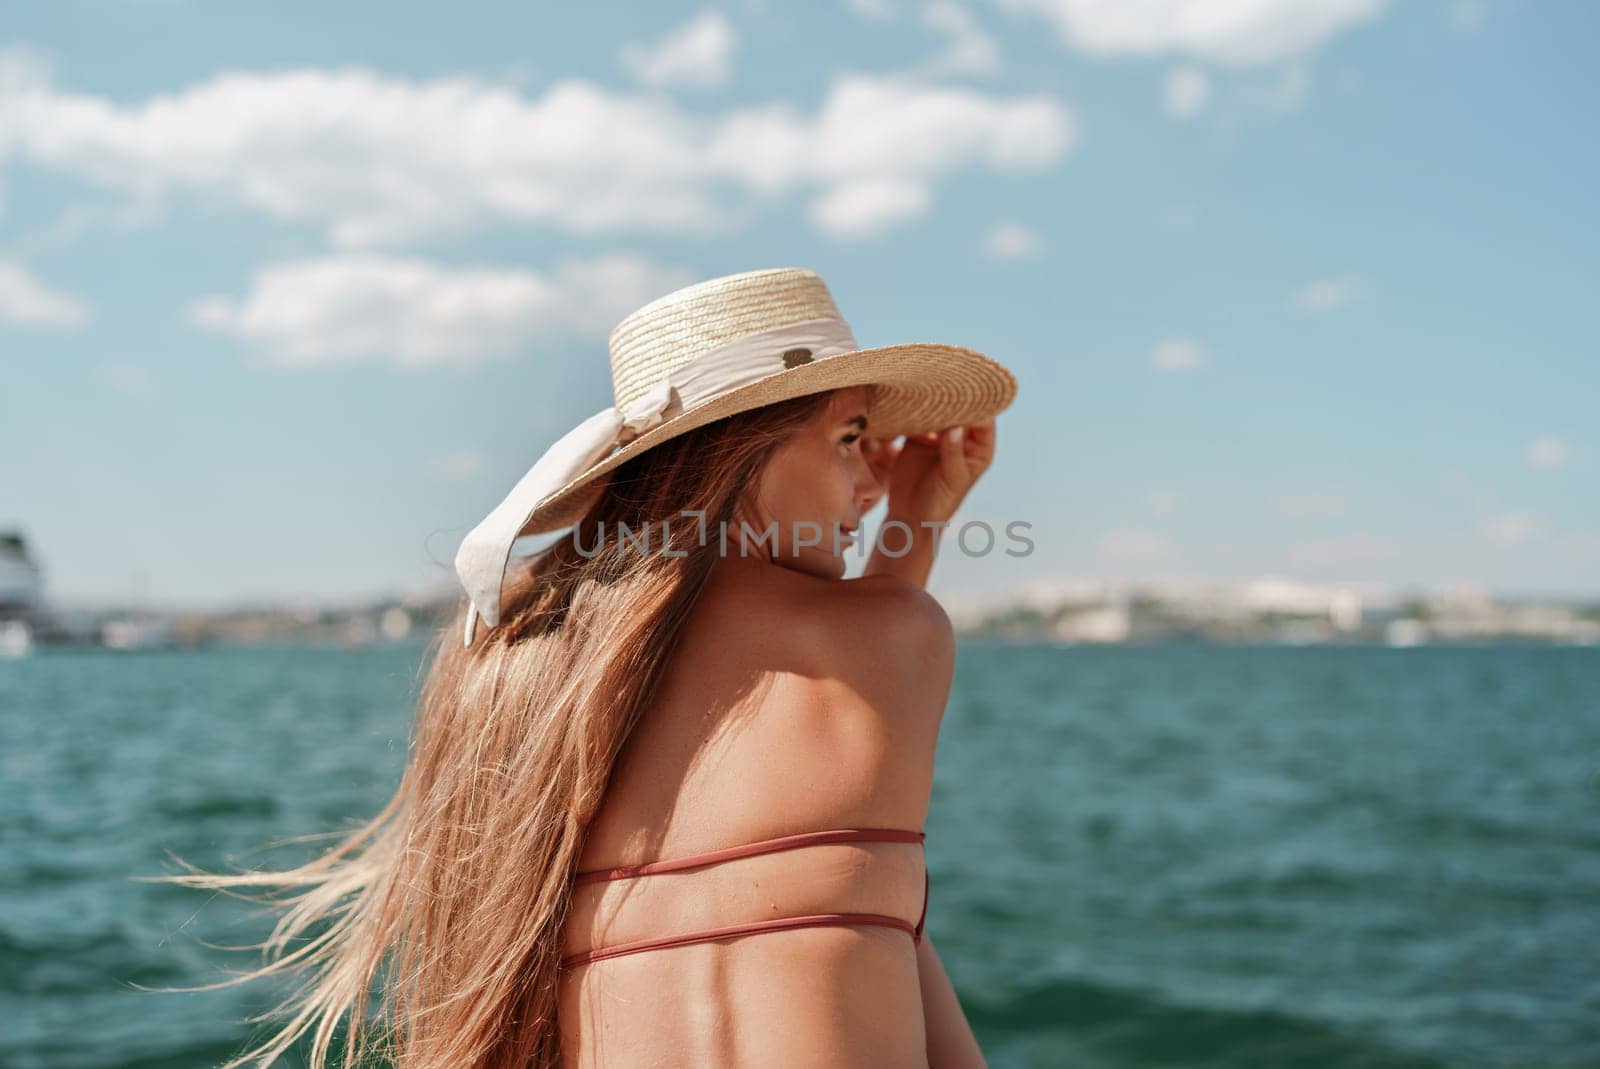 A woman in a swimsuit sits with her back holding a hat, looks at the ocean, sunny day, relaxes